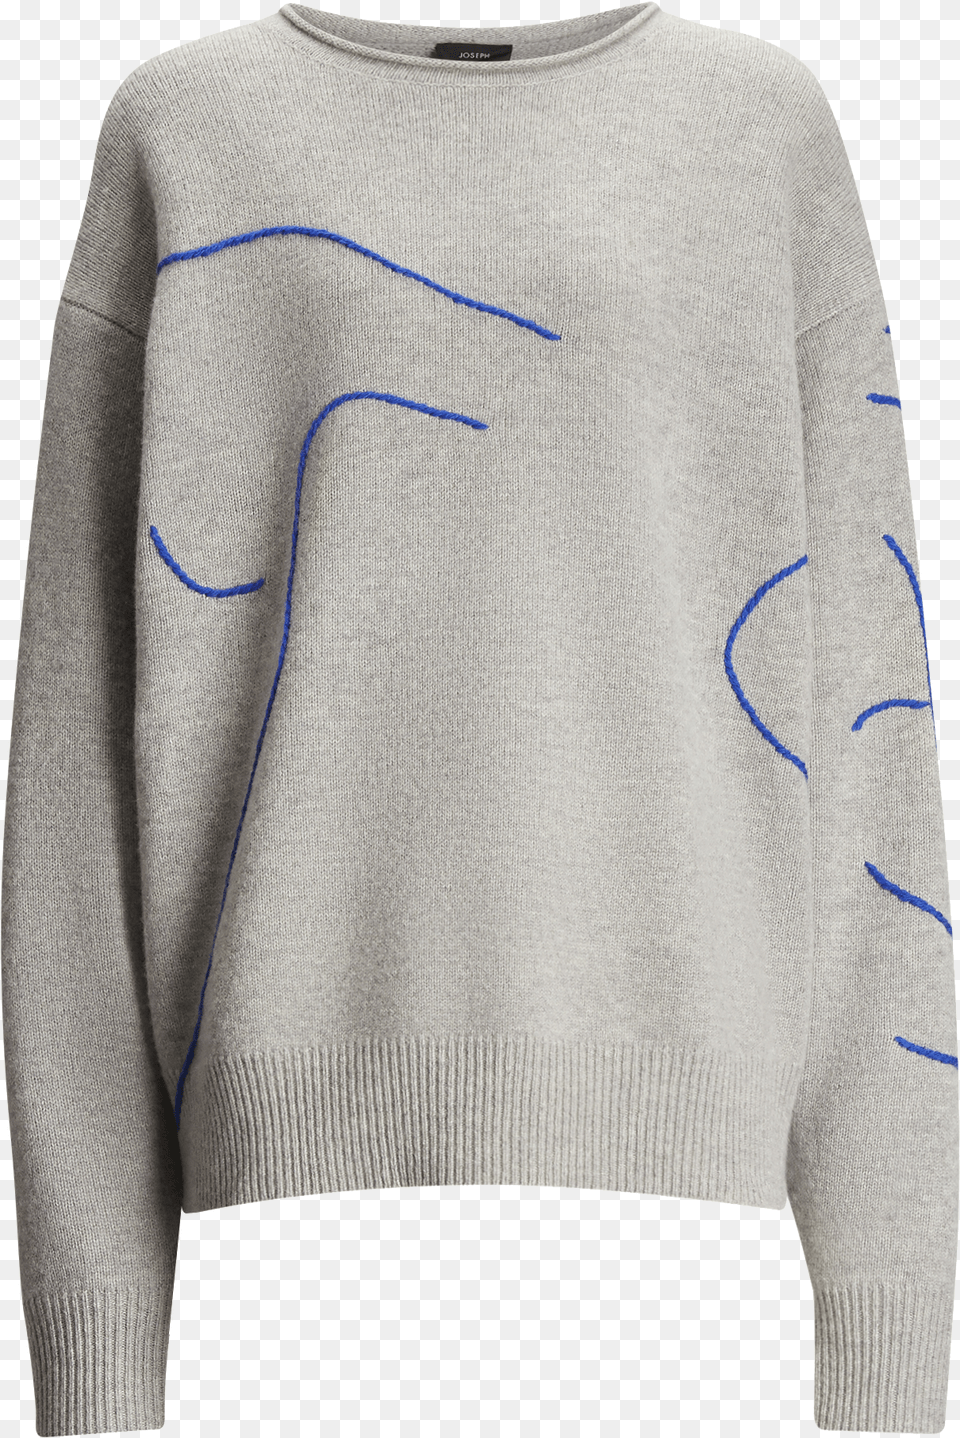 Joseph Embroidery Knit In Grey Chine Sweater, Clothing, Knitwear, Sweatshirt, Hoodie Free Png